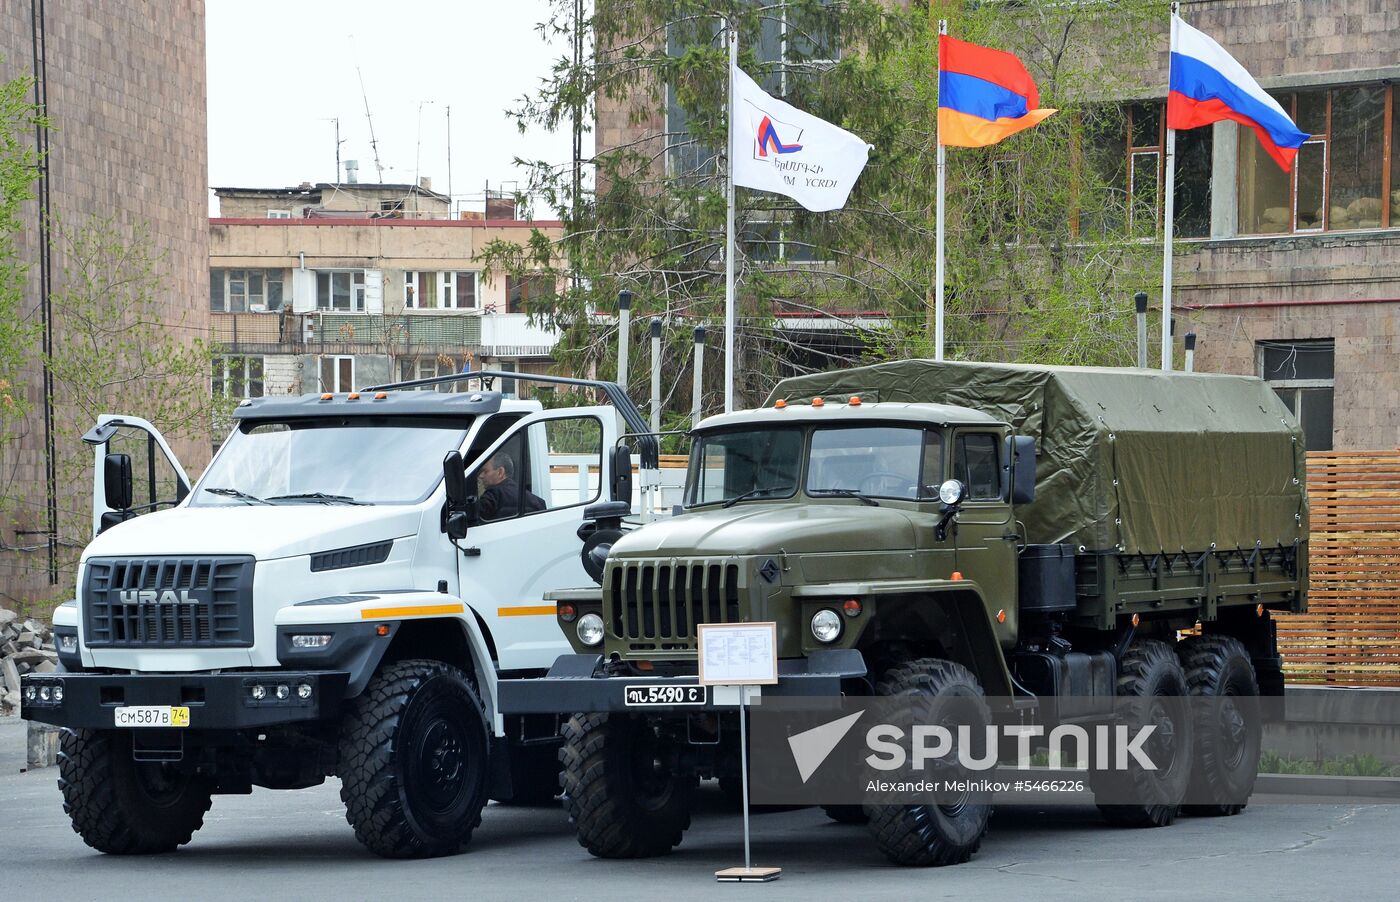 ArmHiTec-2018 International Exhibition of Arms and Defense Technologies in Yerevan